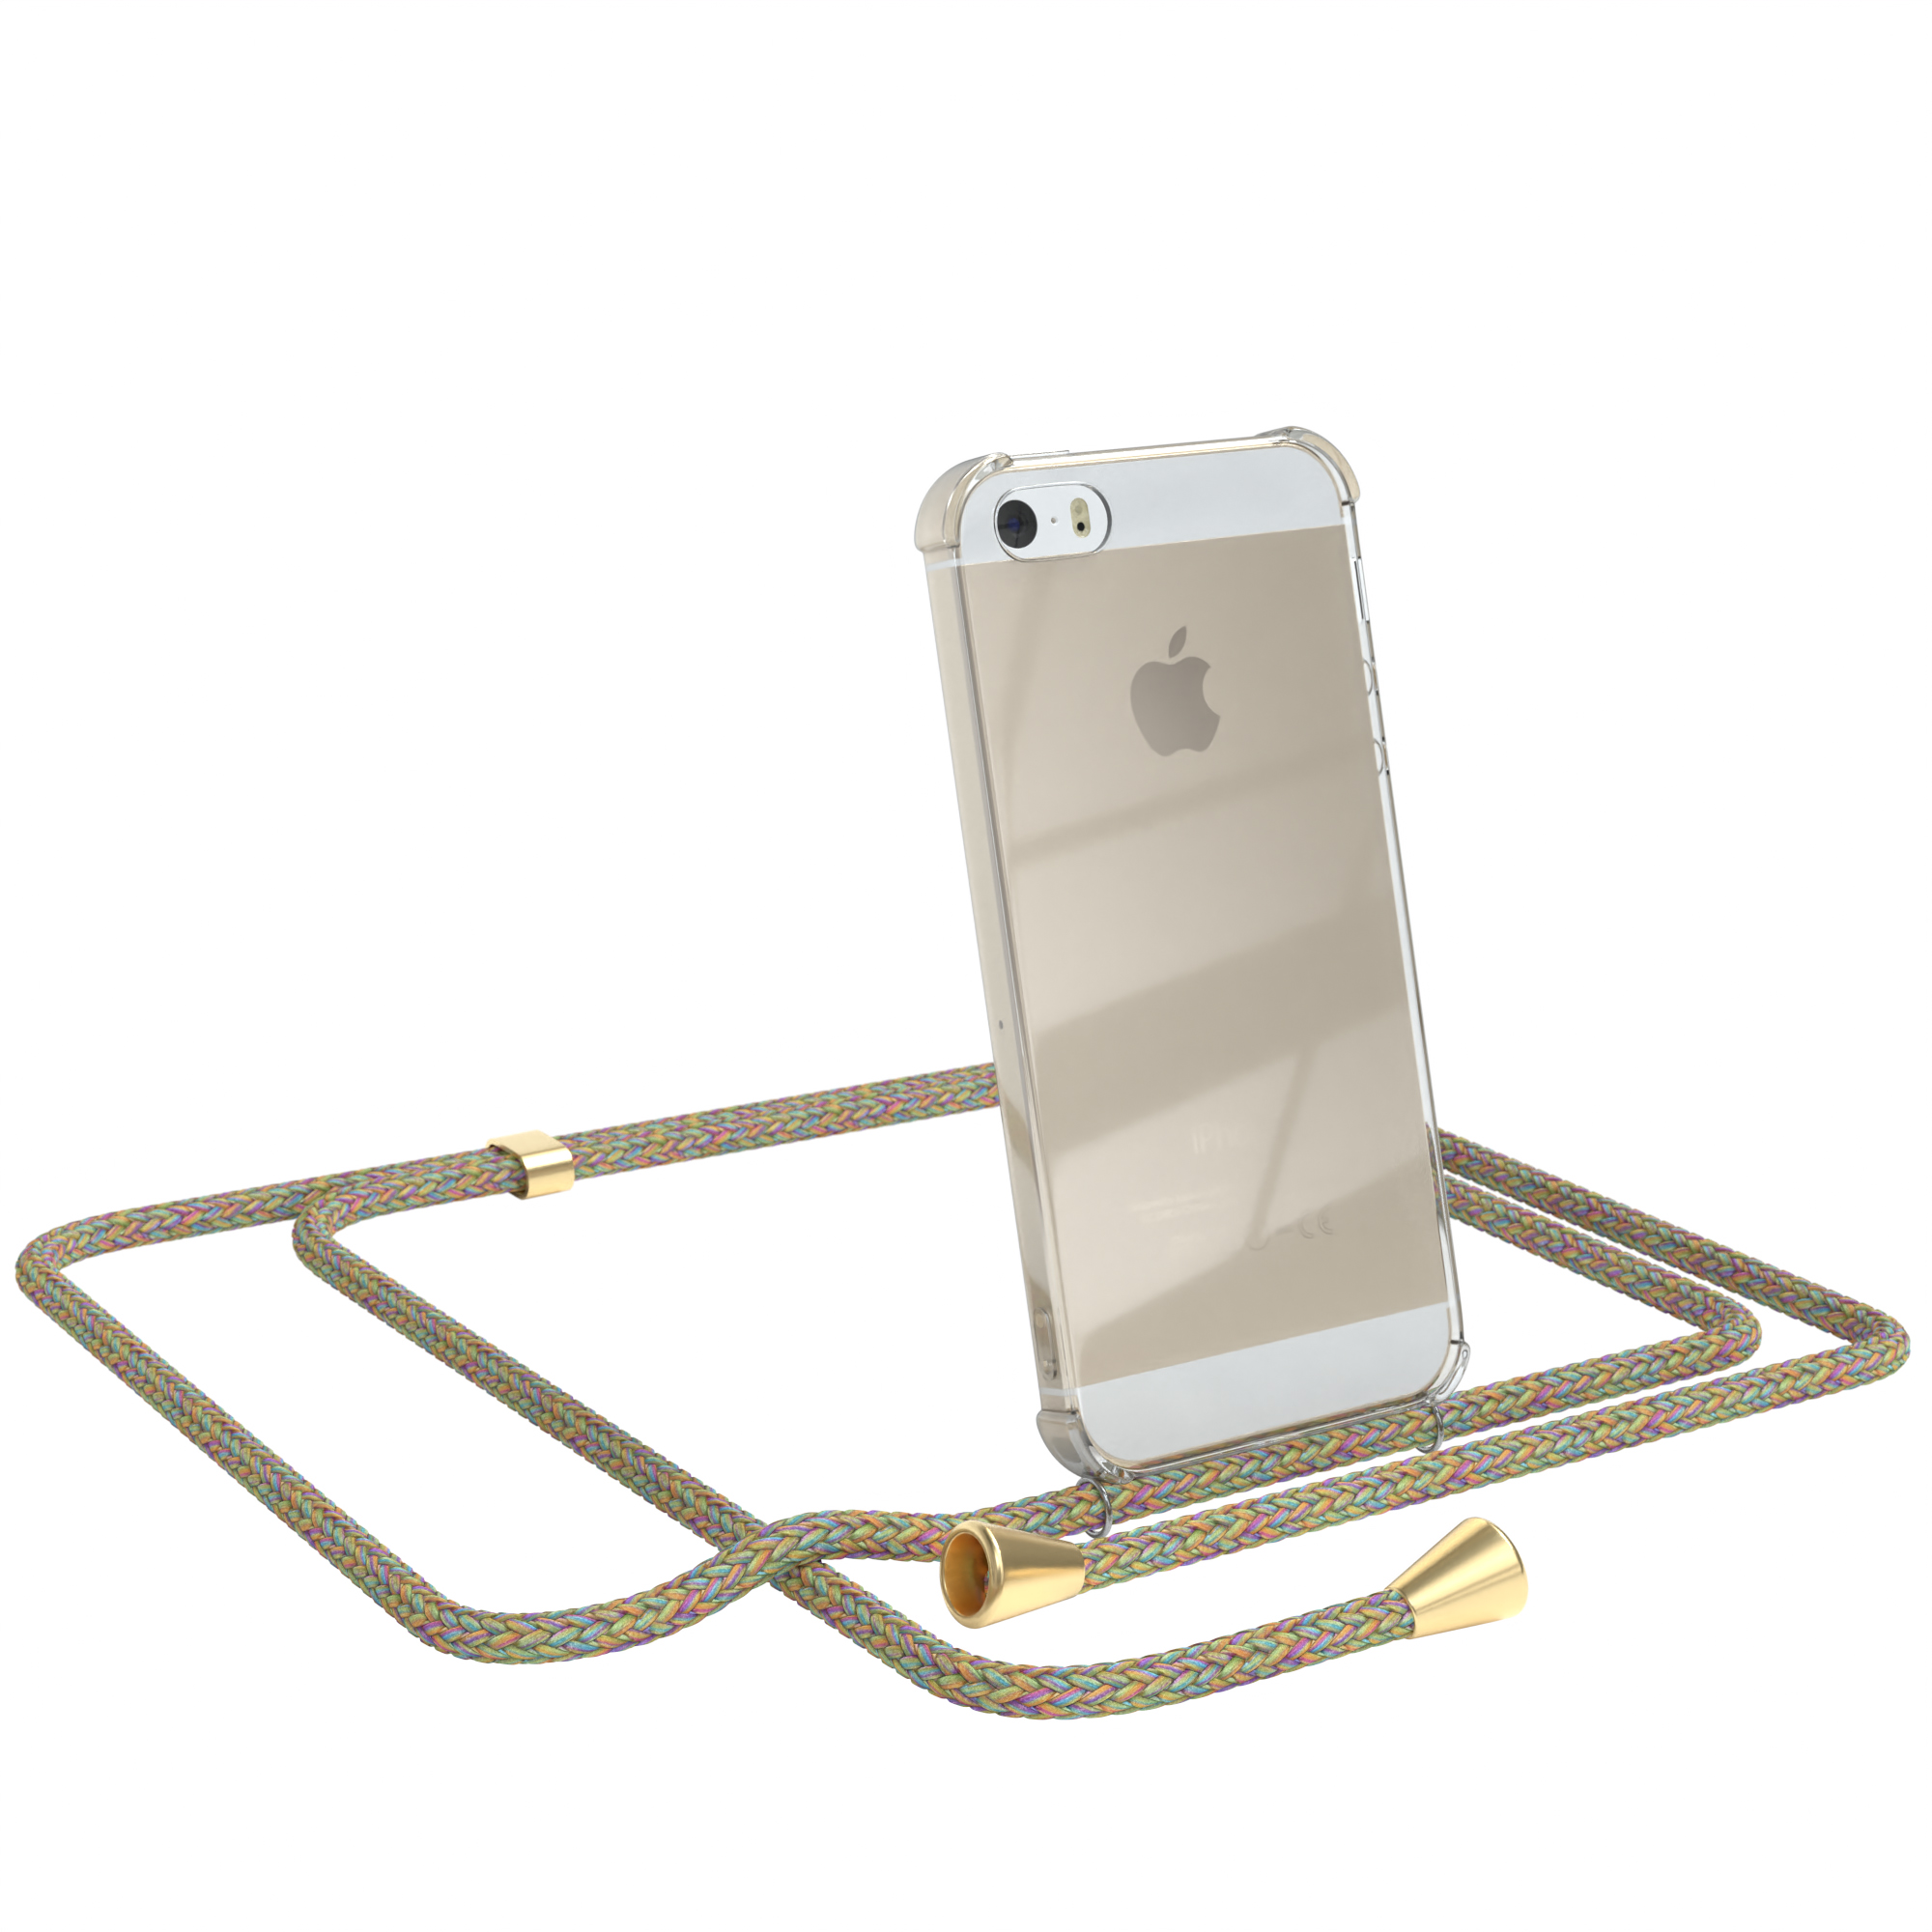 EAZY CASE Clear Cover 5S, 5 Clips mit Umhängetasche, iPhone Bunt Umhängeband, 2016, iPhone SE Gold Apple, / 